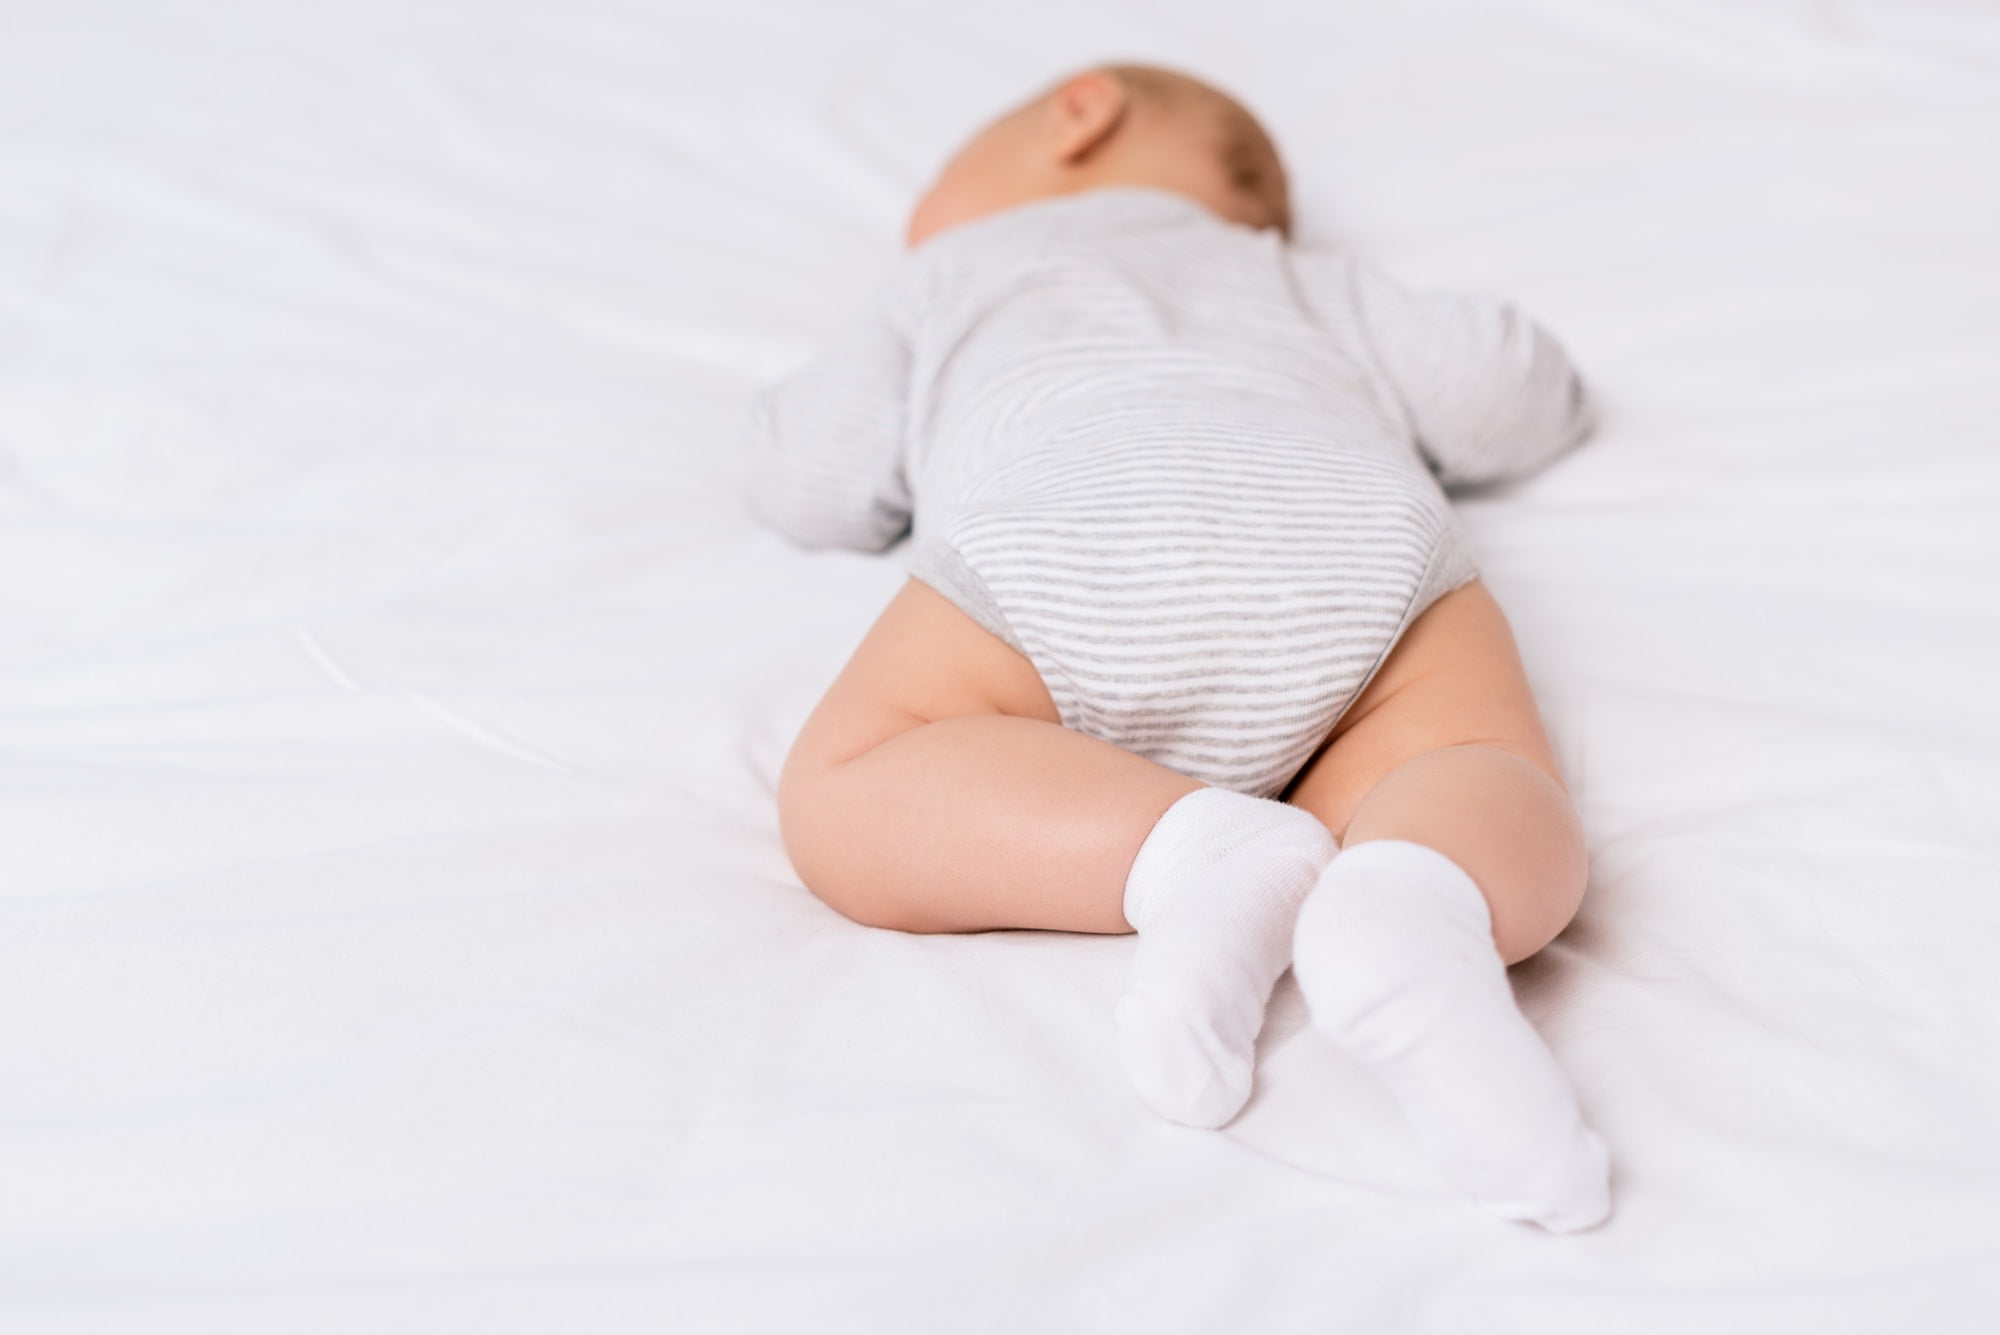 back view of infant in socks lying on bed